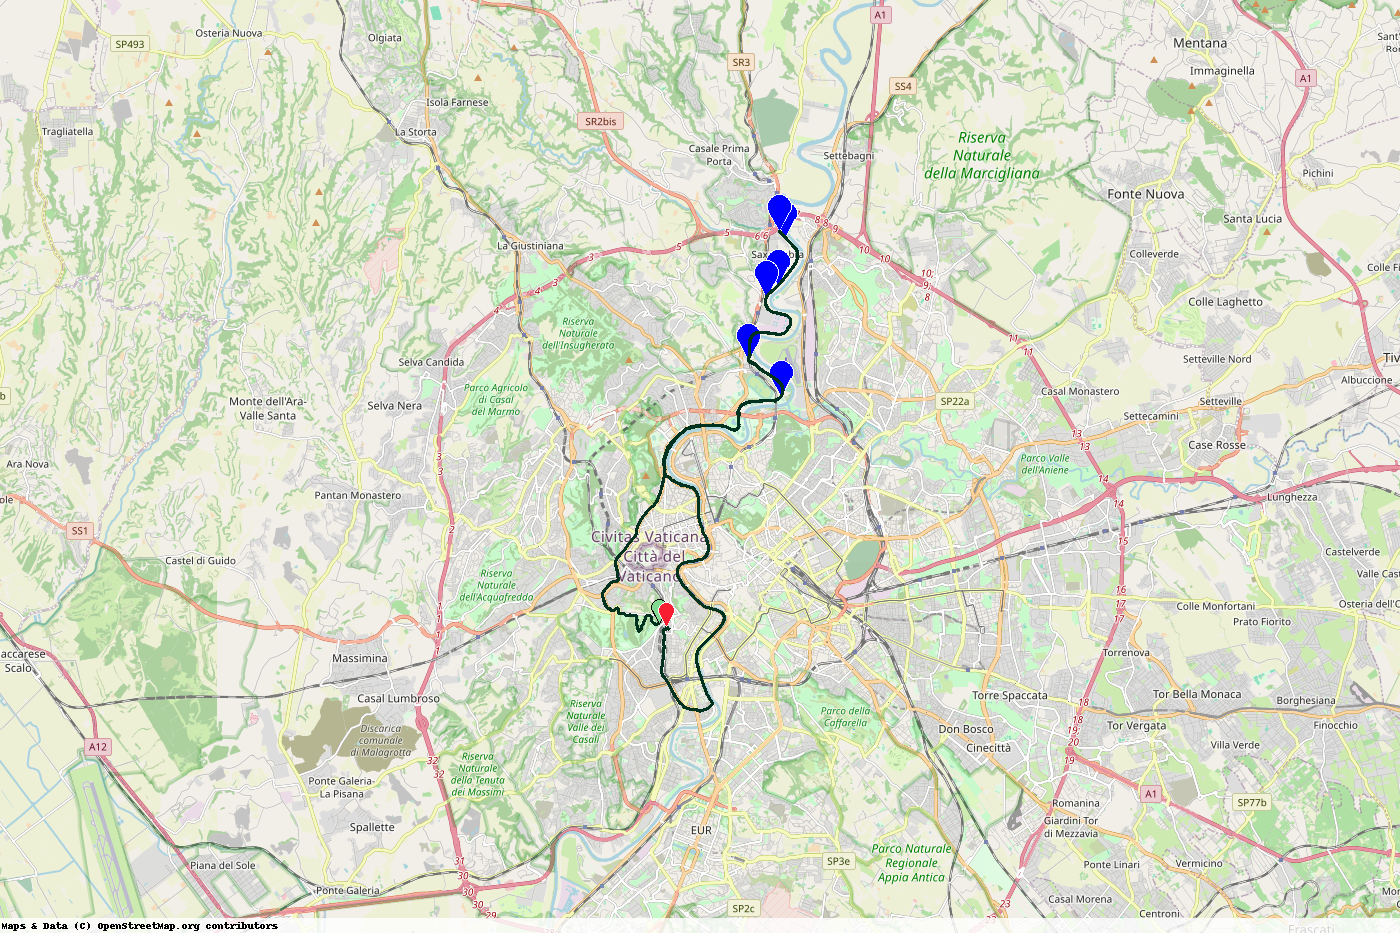 Map of route with blue markers for photo locations